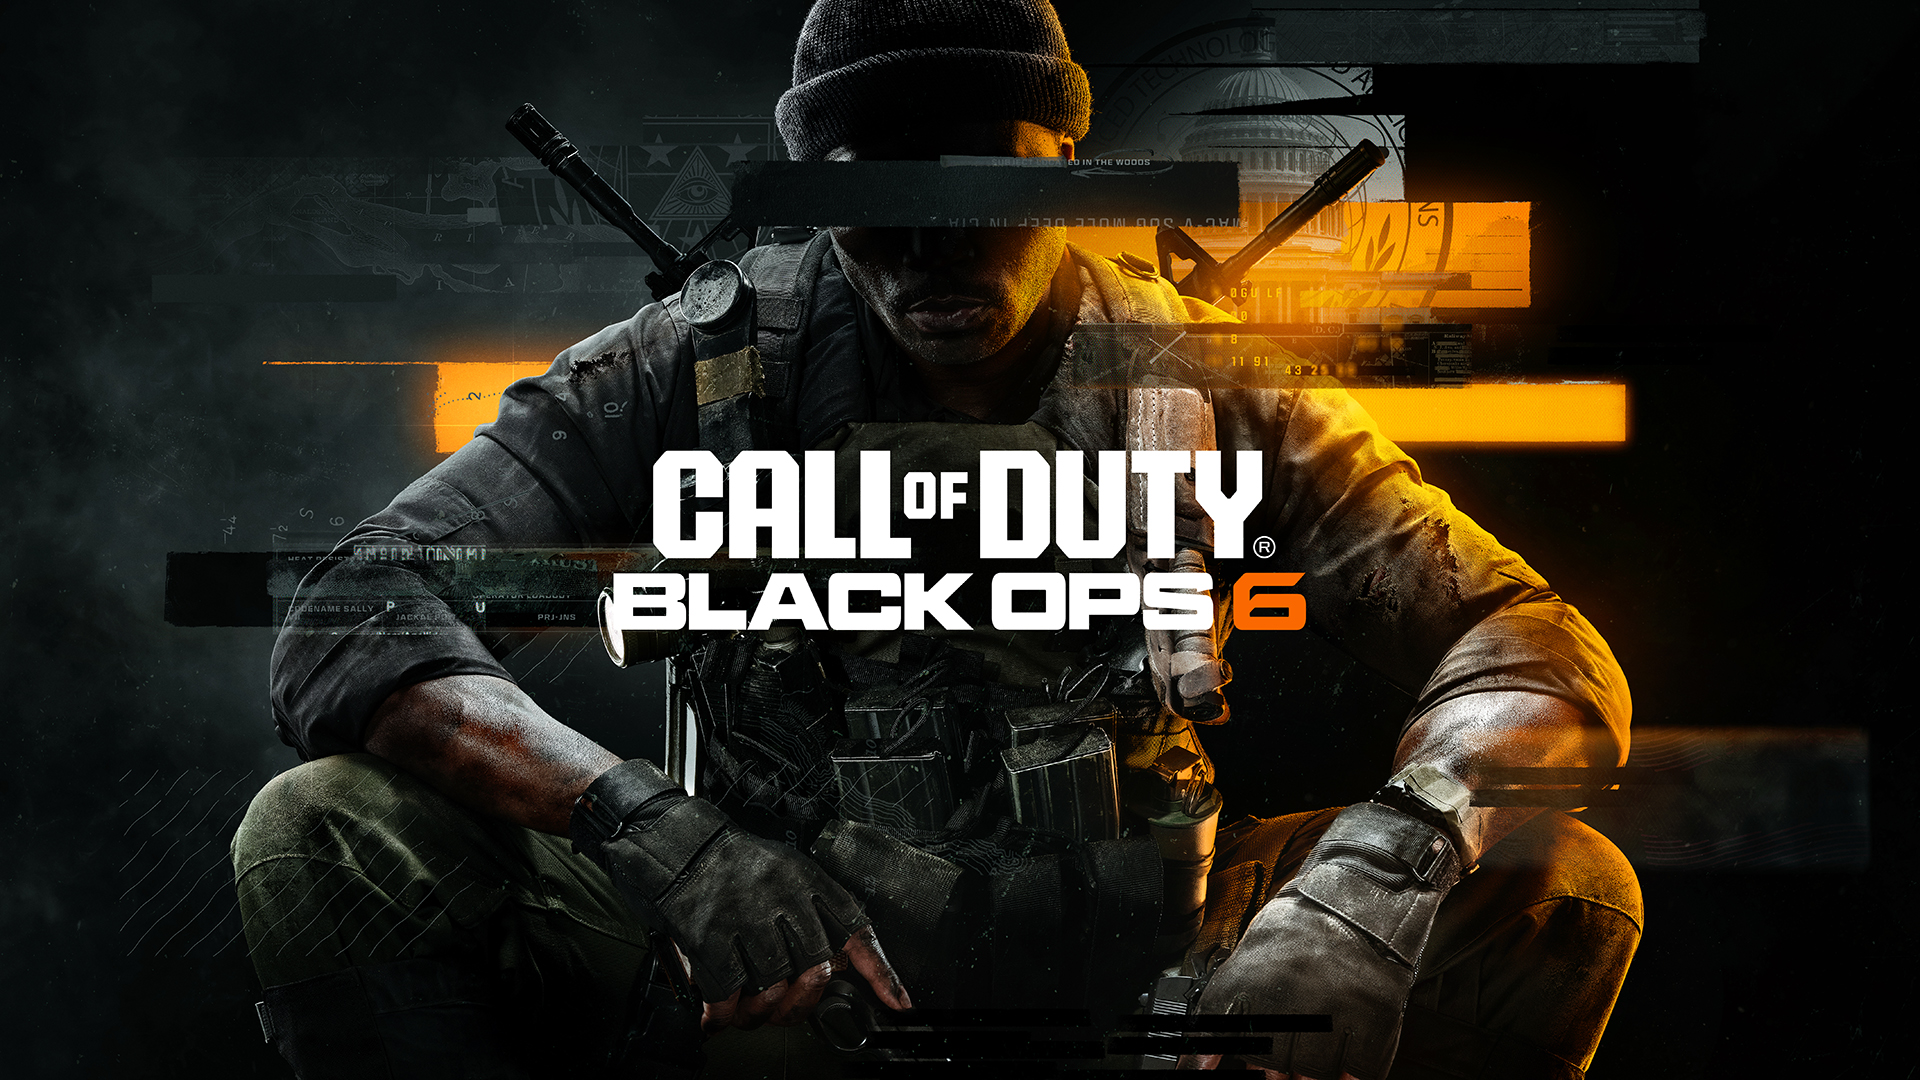 The rumours turned out to be true: Call of Duty: Black Ops 6 will be available on previous generation consoles - the game's page has appeared in the PlayStation Store